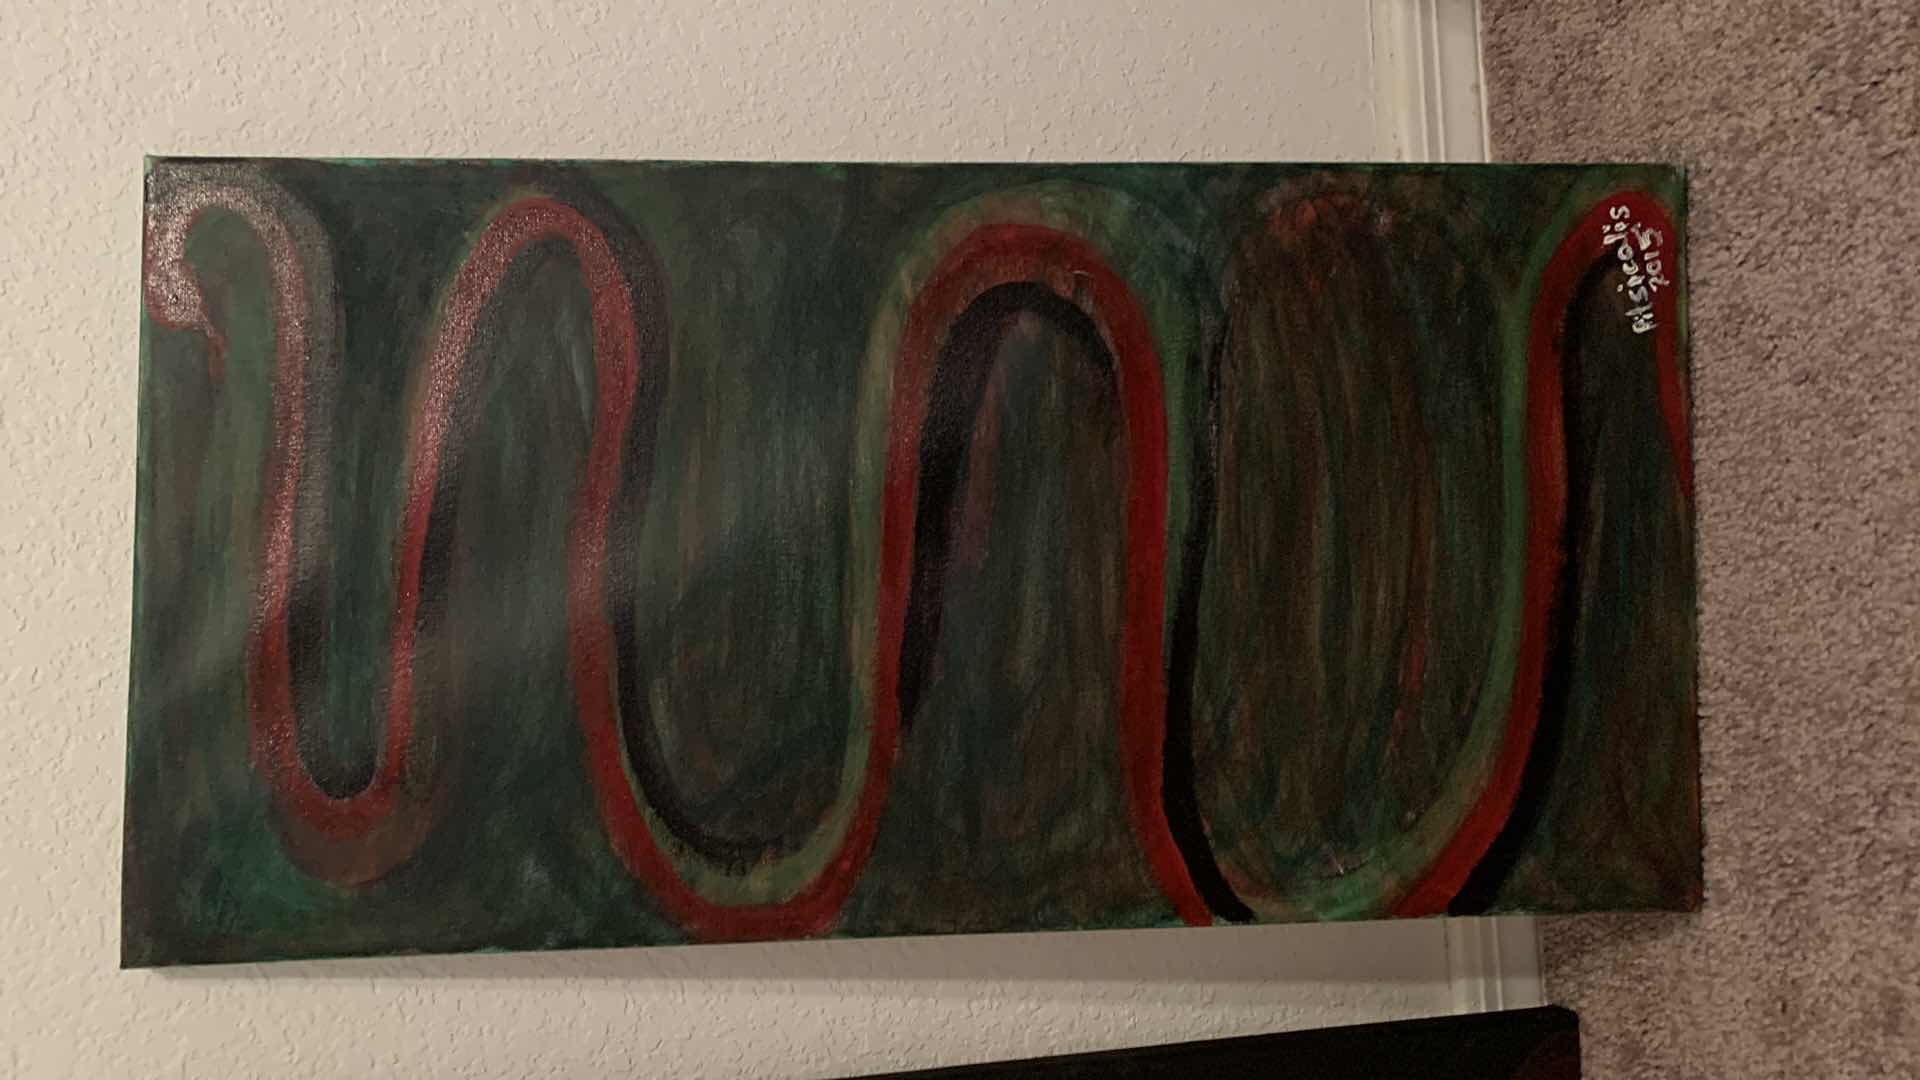 Photo 4 of STRETCHED CANVAS PAINTED ARTWORK ABSTRACT SIGNED PITSICALIS  4-,12” x 24” 1- 18” x 24”